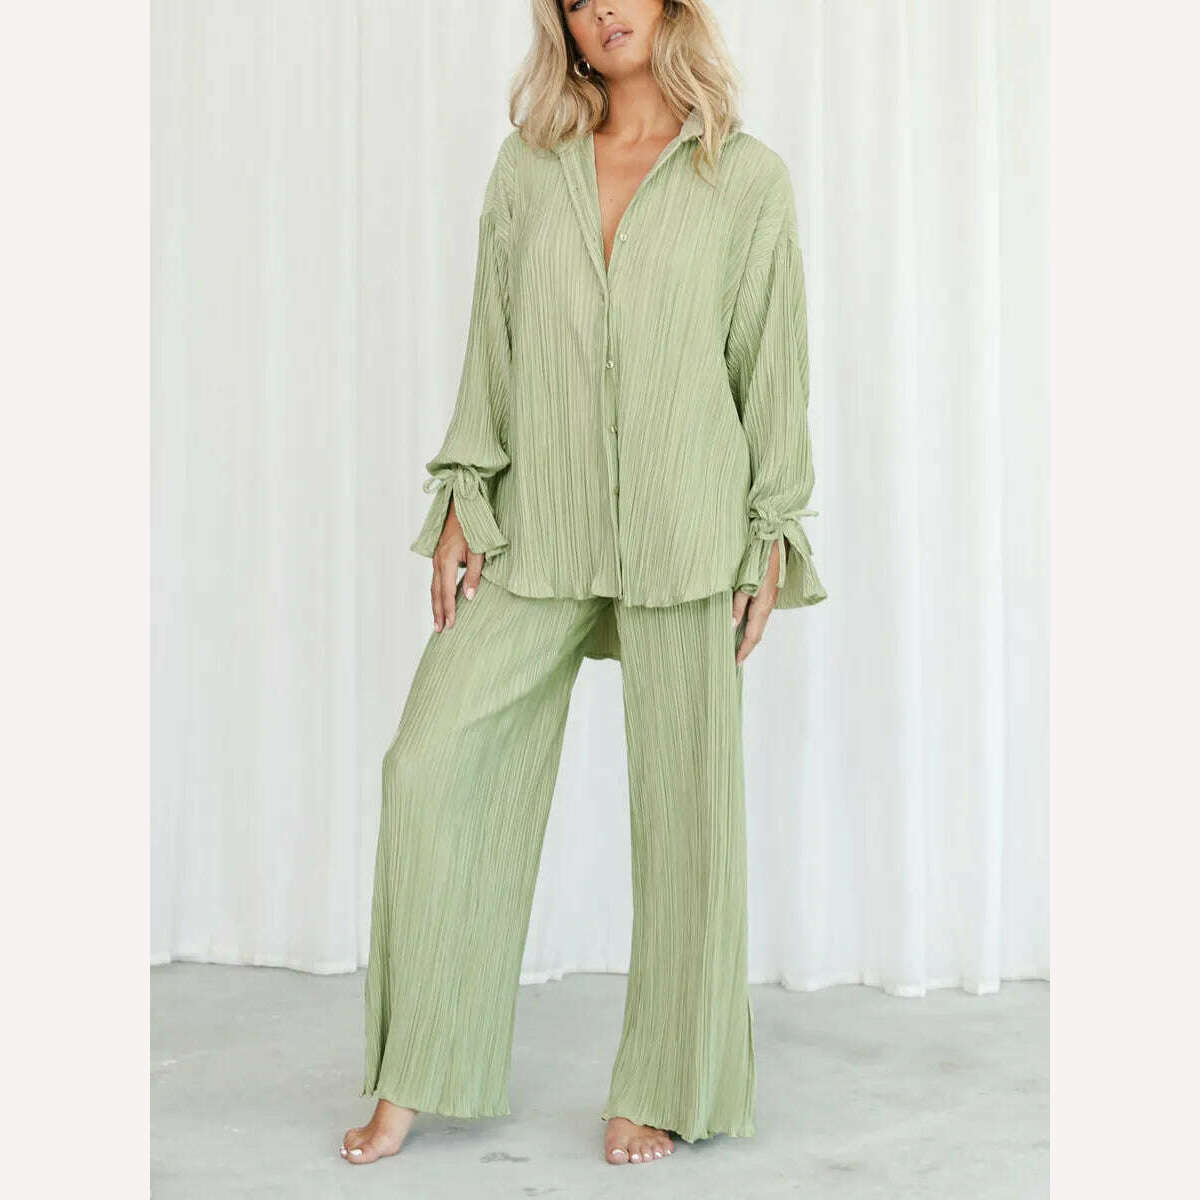 KIMLUD, wsevypo Women Two-piece Pleated Pants Suits Casual Chic Solid Color Long Sleeve Button down Shirts and Straight Leg Trousers Set, Light Green / S, KIMLUD Womens Clothes